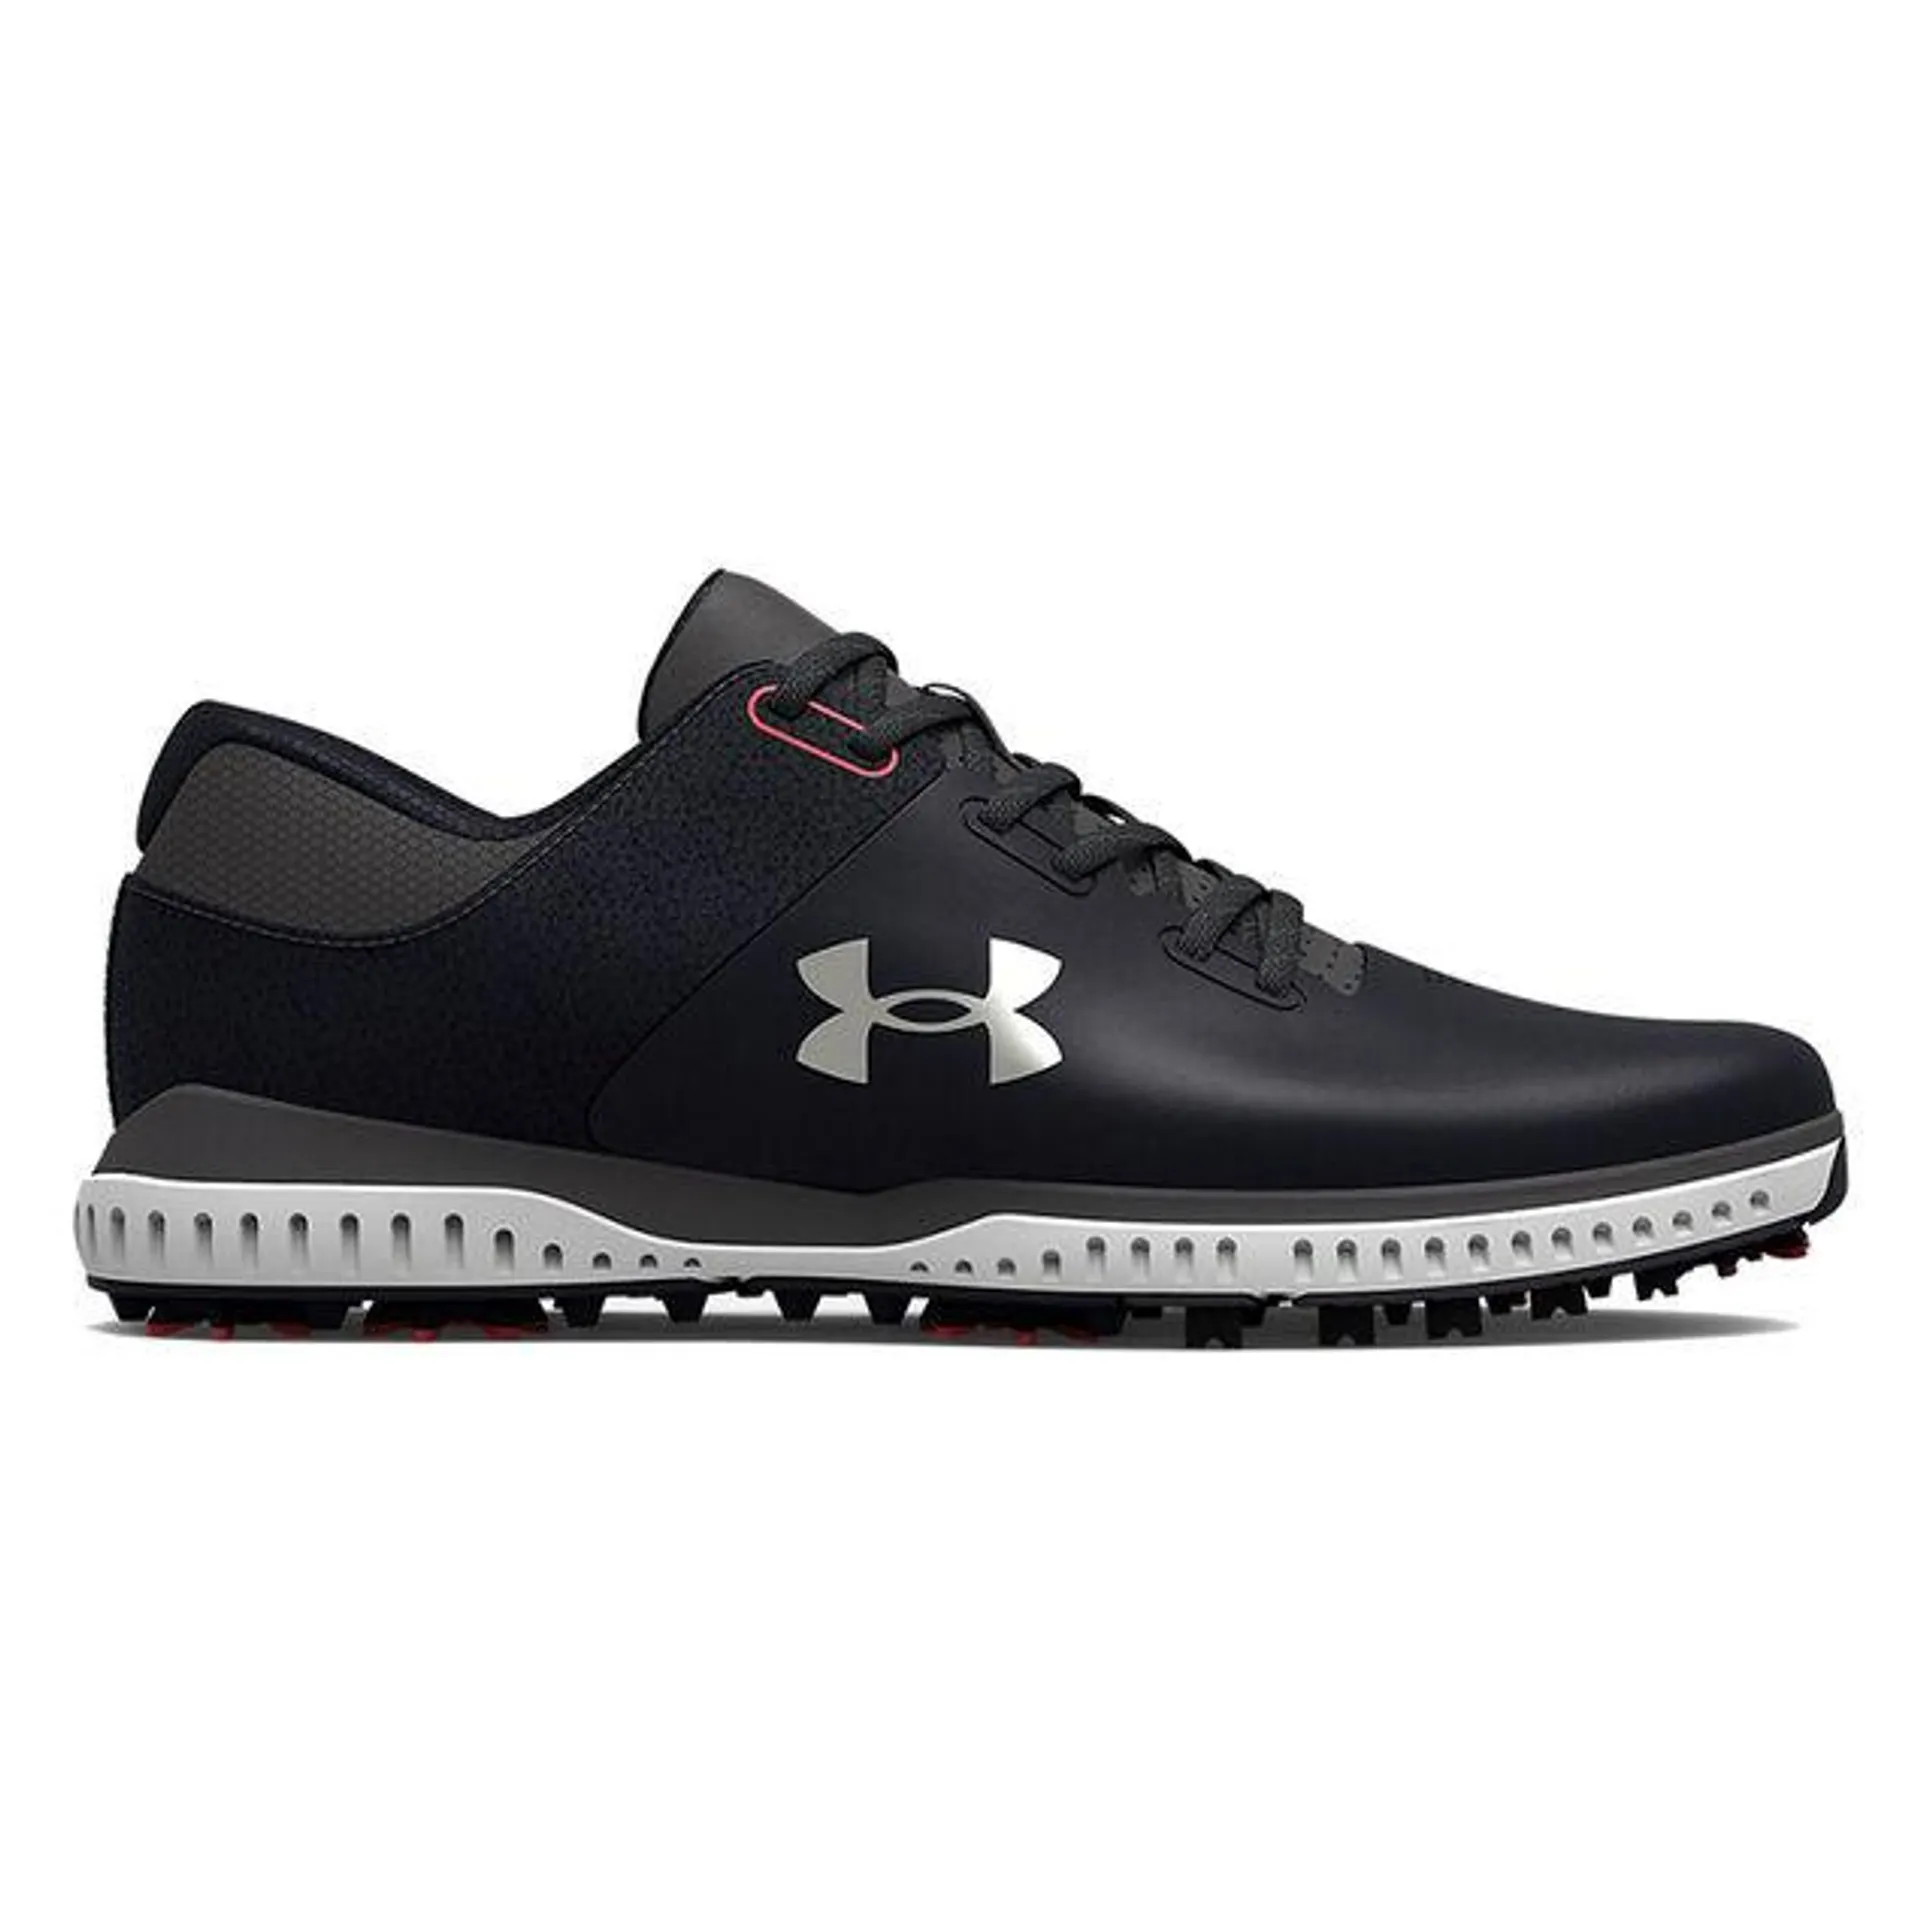 Under Armour Men's Medal RST Waterproof Spiked Golf Shoes